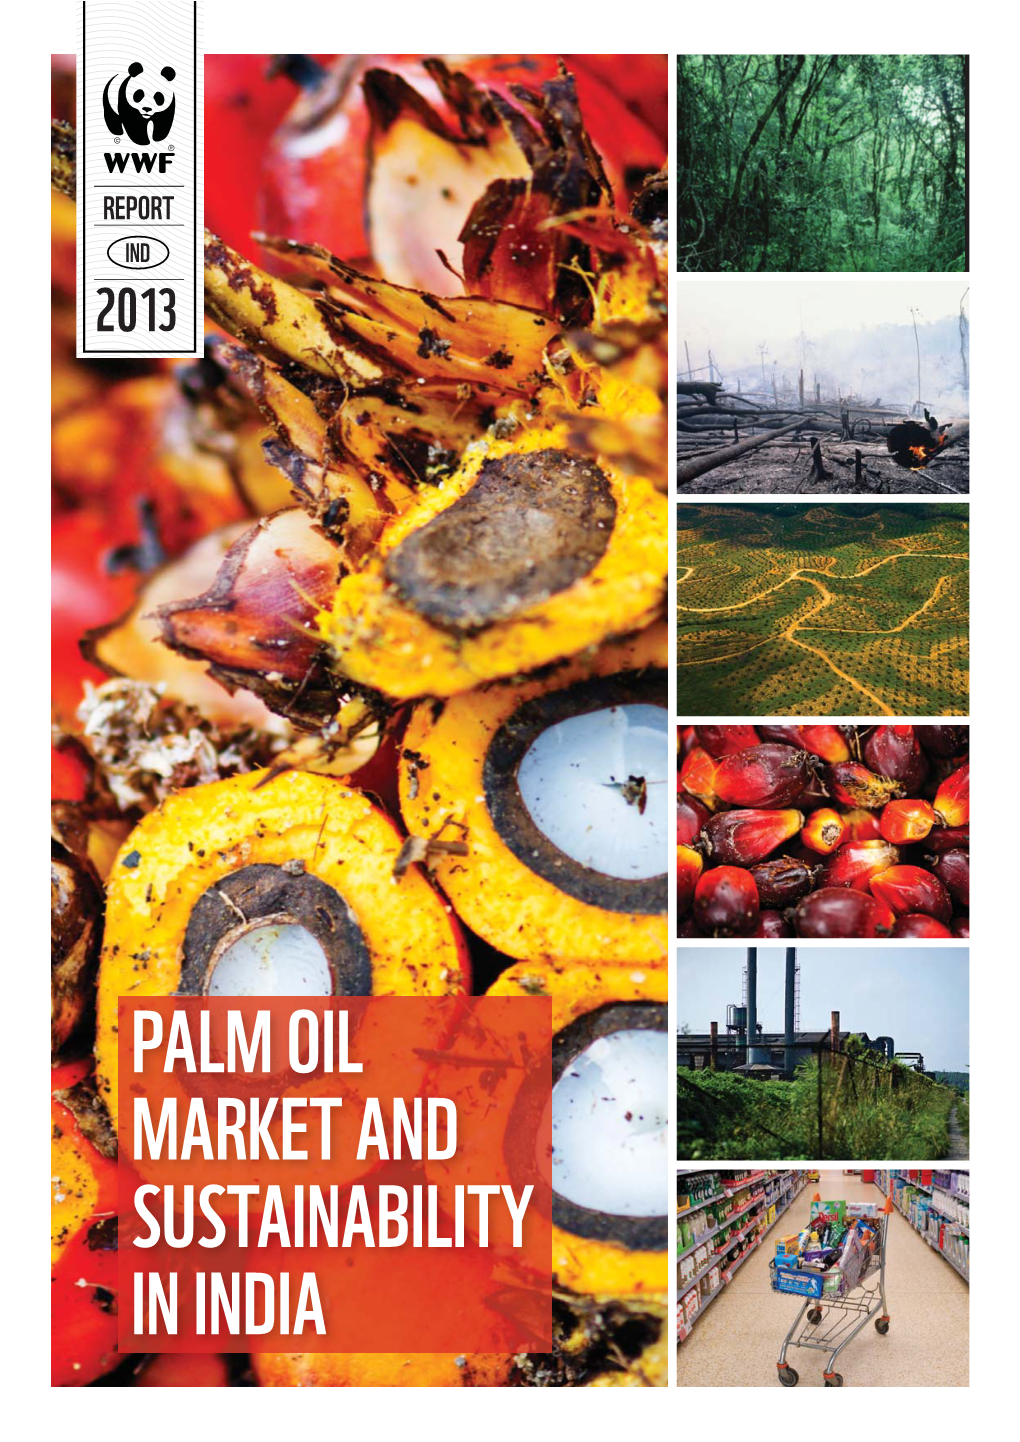 PALM OIL MARKET and SUSTAINABILITY in INDIA the Publication Is a Part of WWF’S Market Transformation Initiative